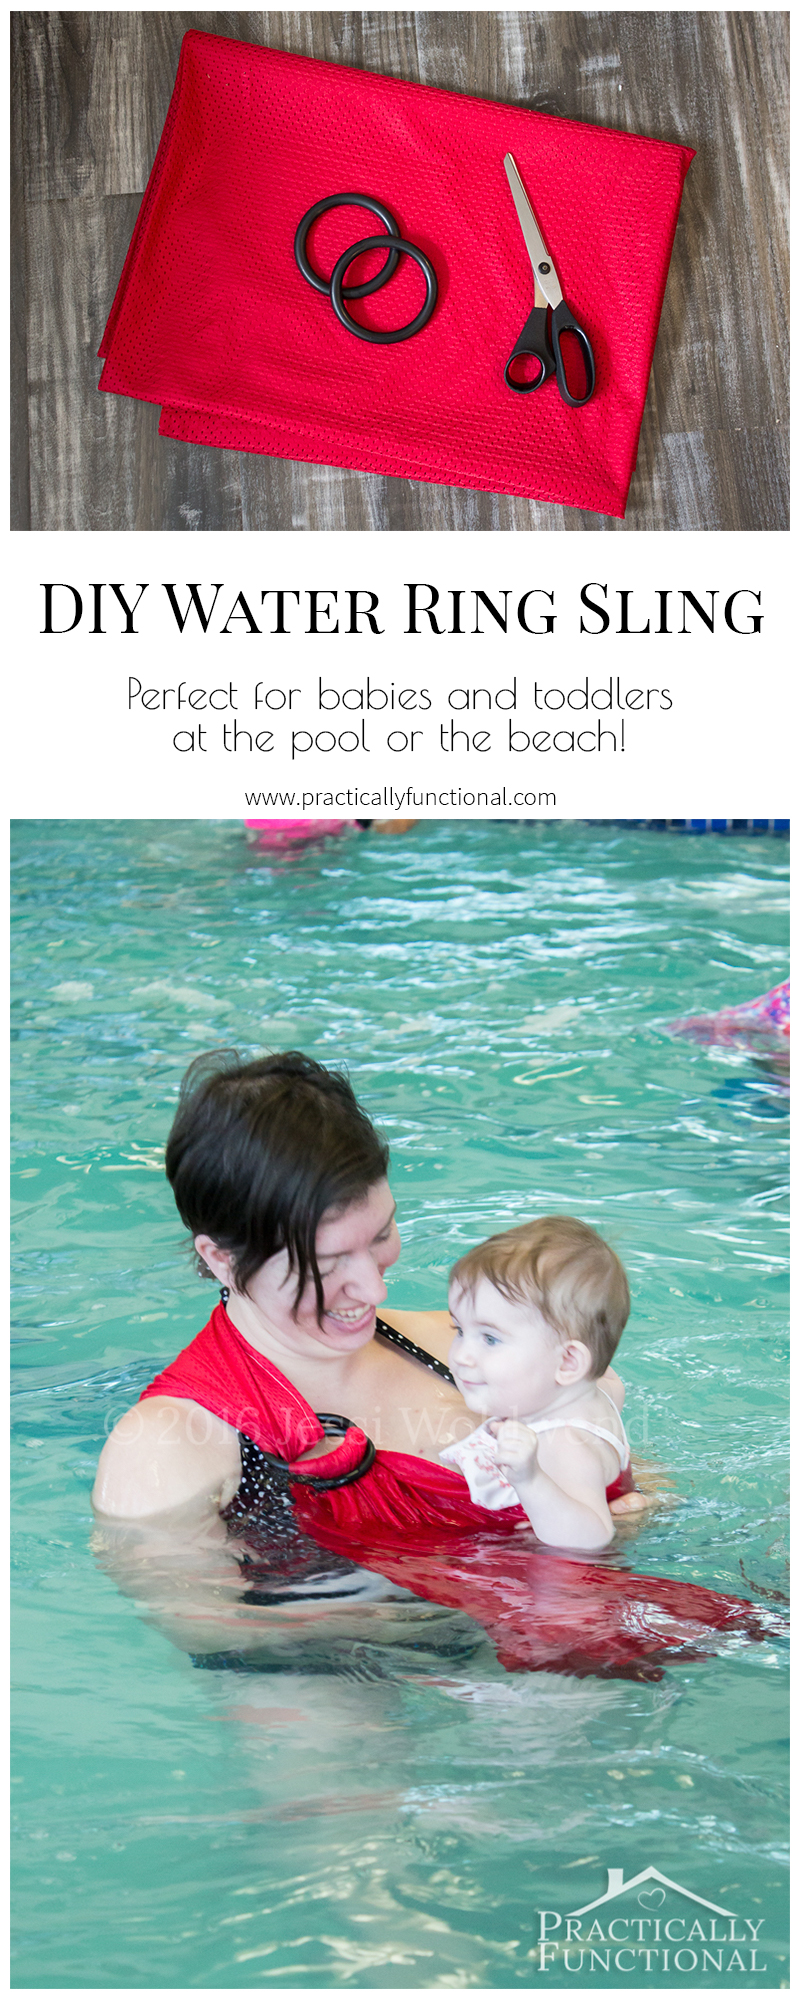 Love this DIY water ring sling! So quick and easy to make and it makes it so easy and worry free to go in the water with a baby or toddler!